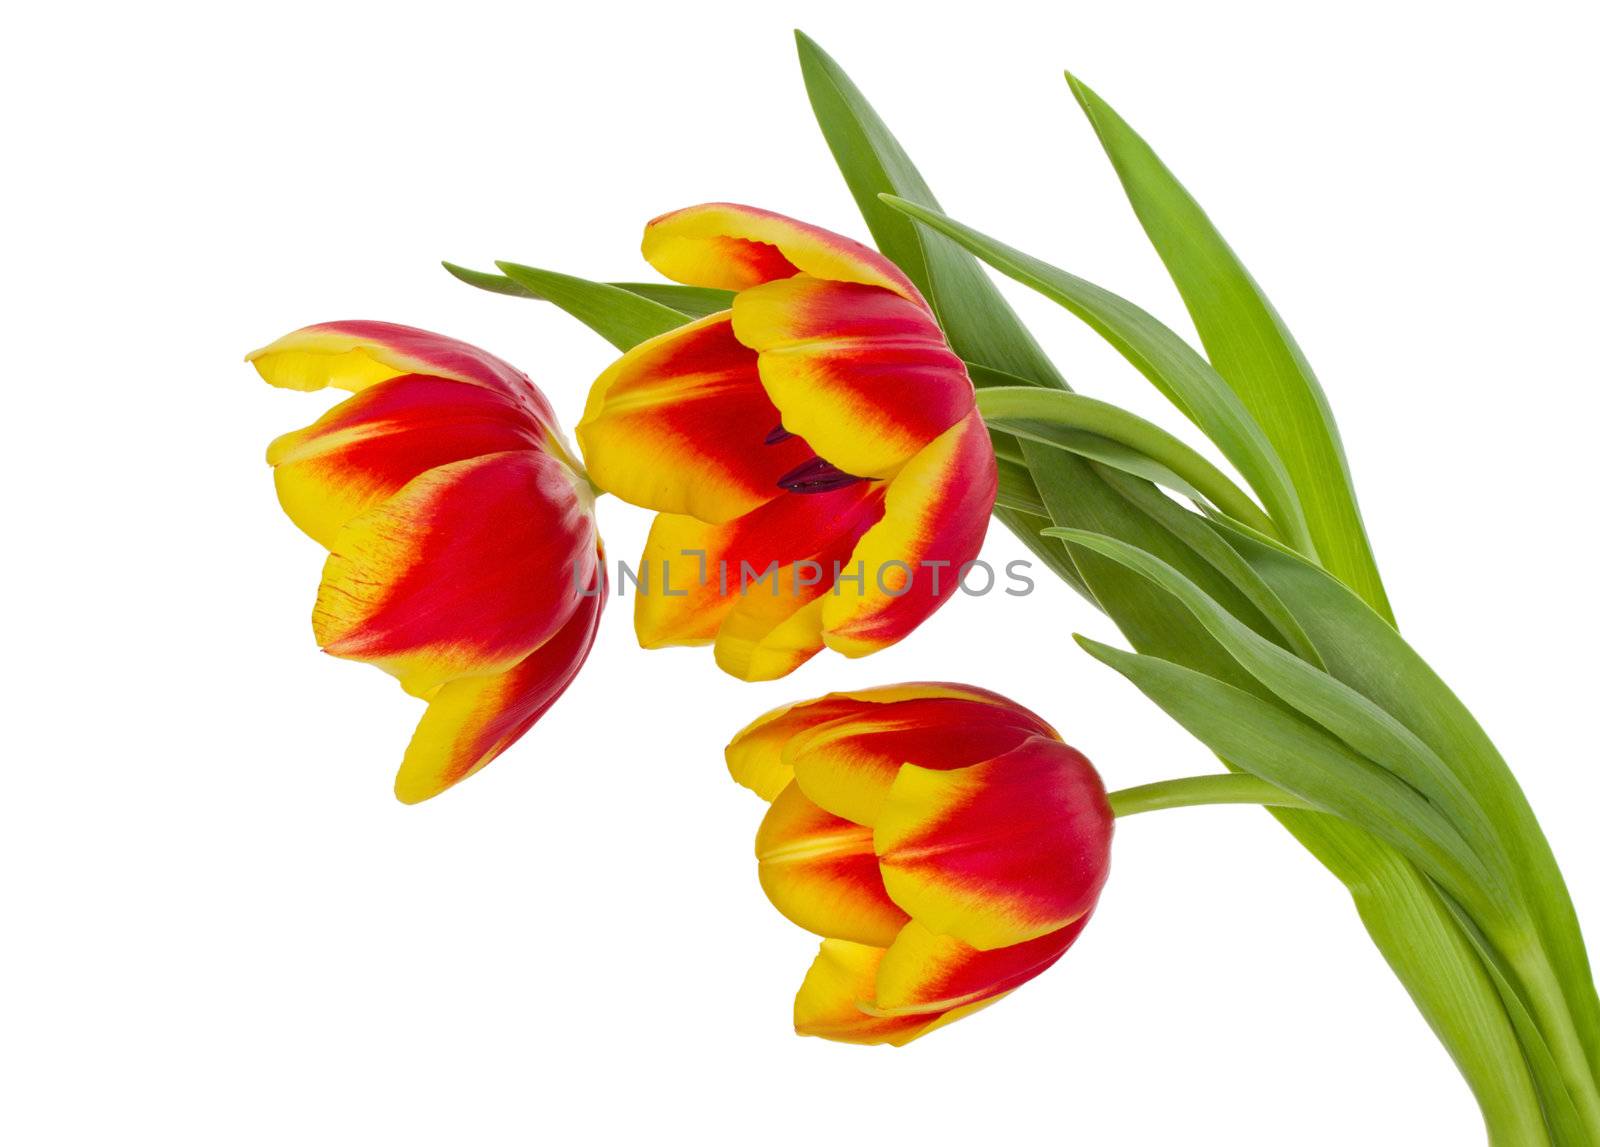 close-up red-yellow tulips bouquet, isolated on white